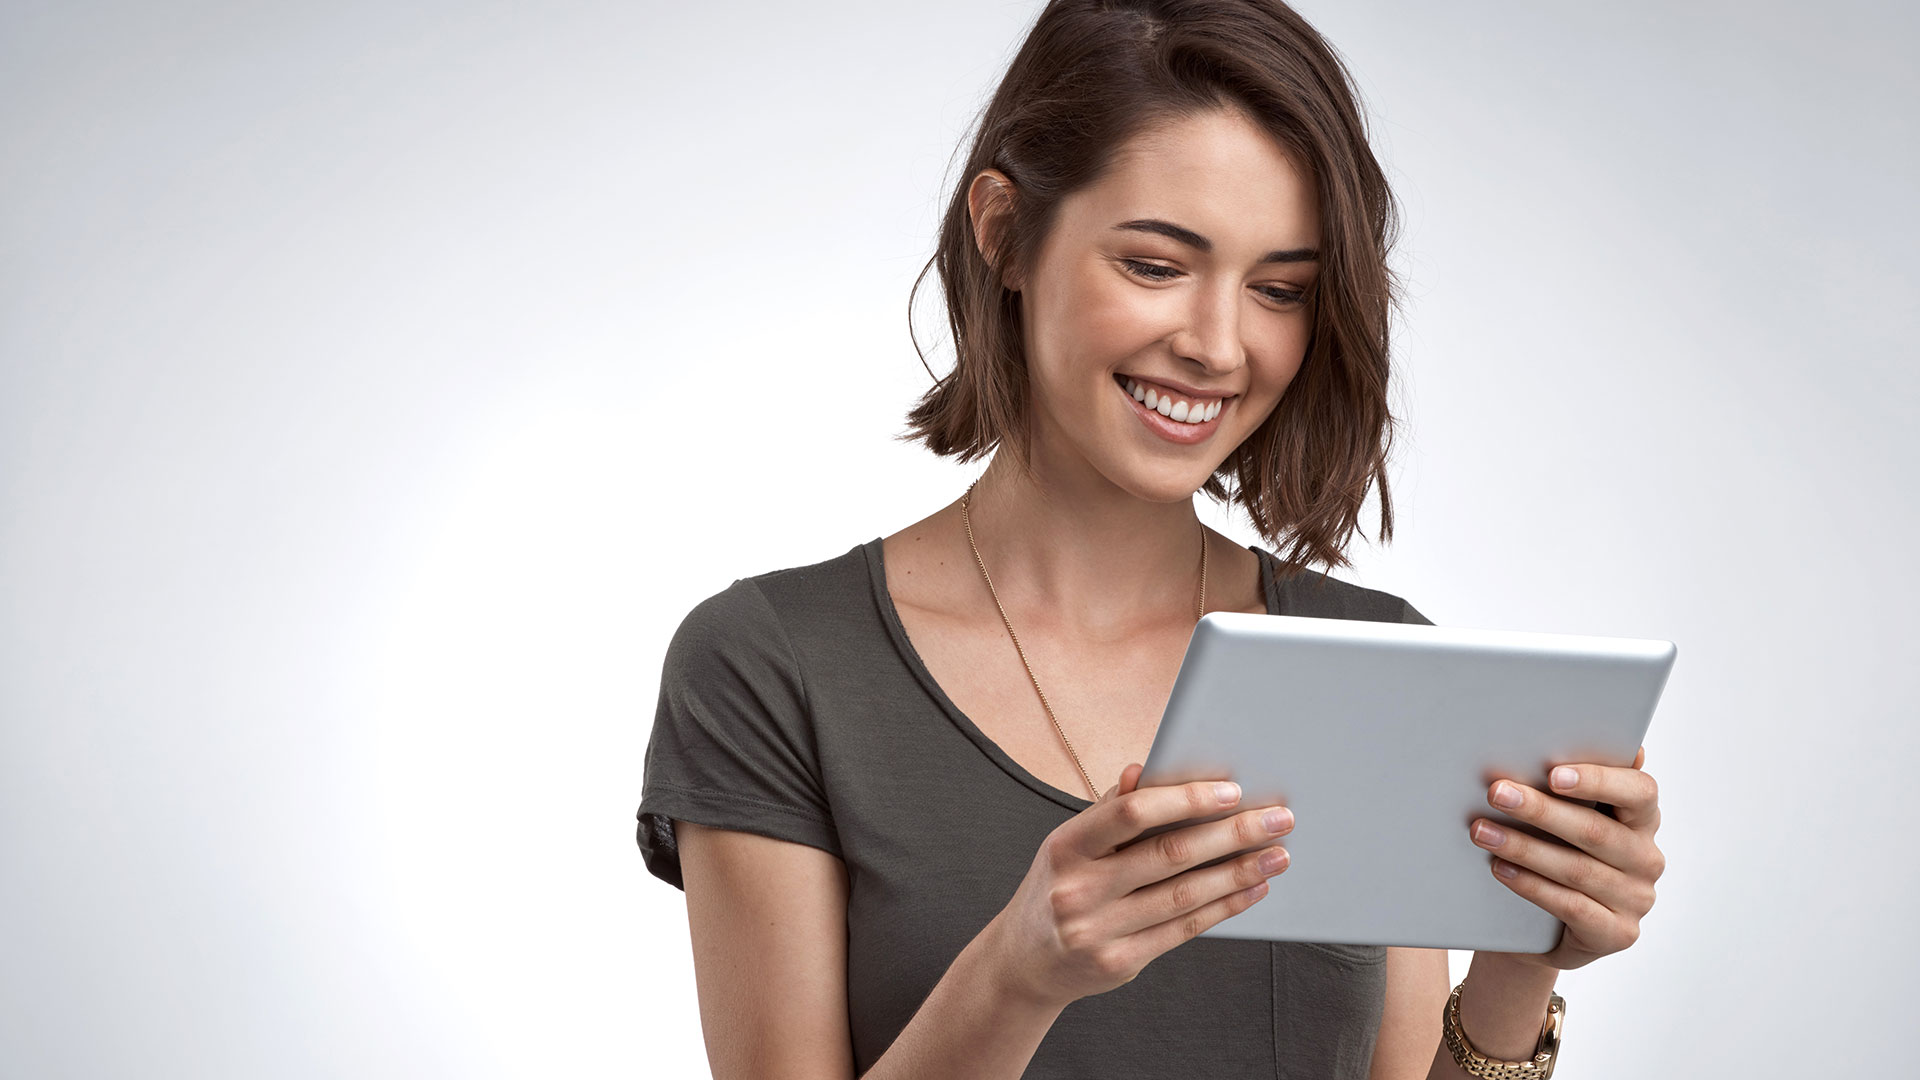 Photo of a woman smiling, using a tablet